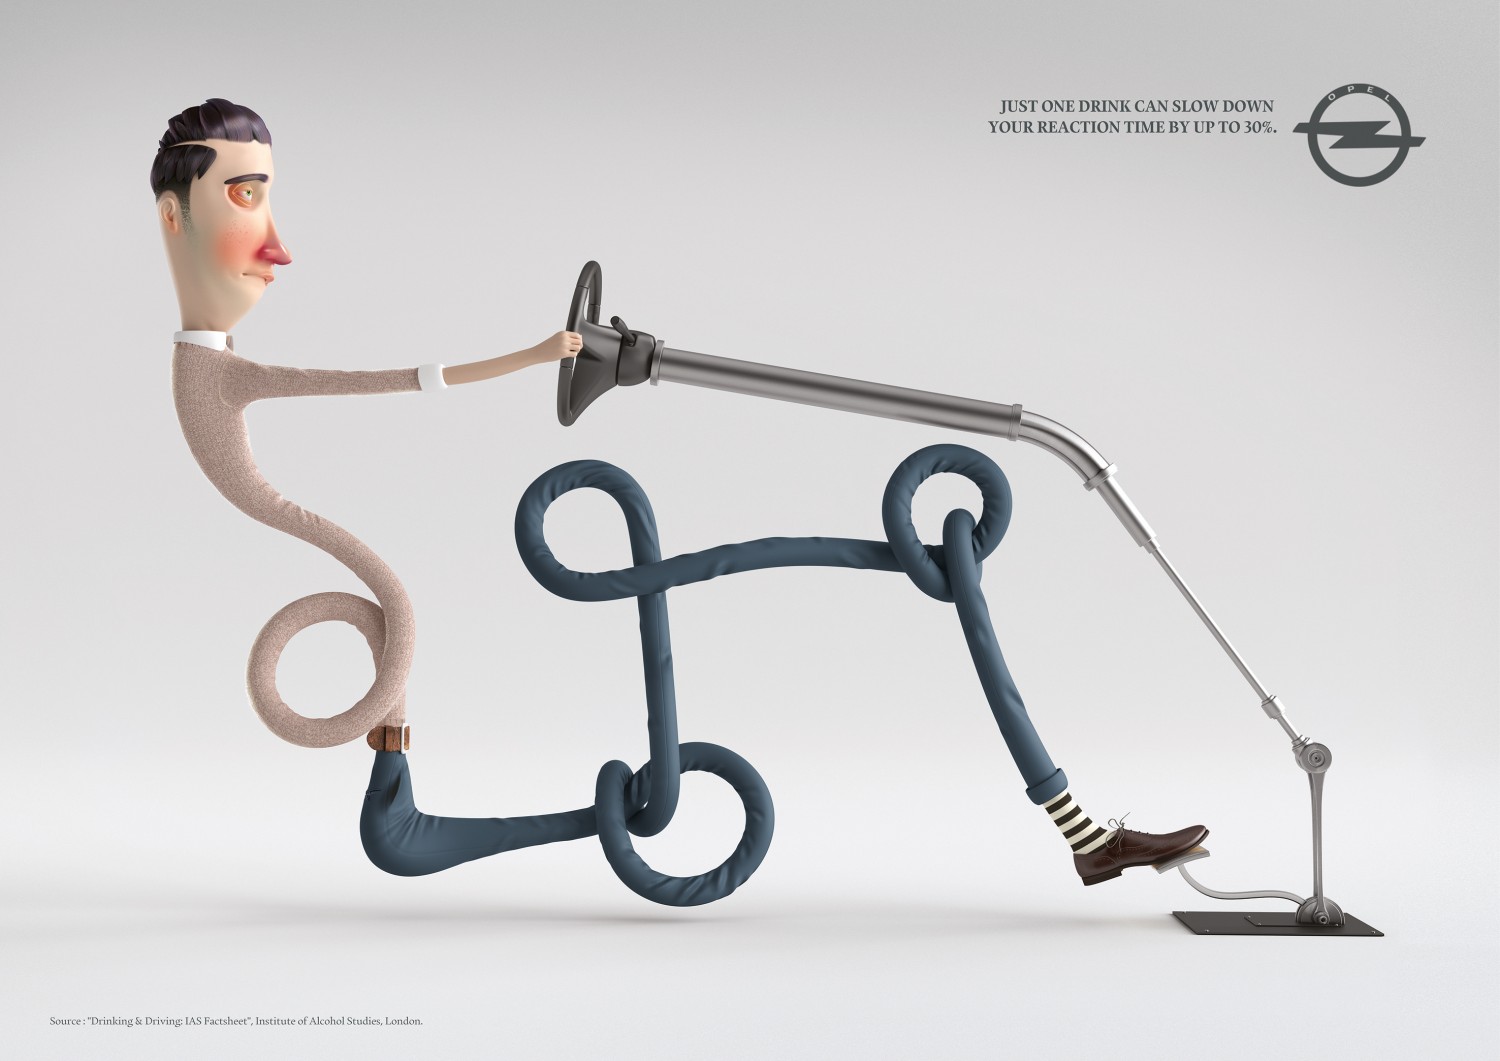 Don't drink and drive campaign by Opel